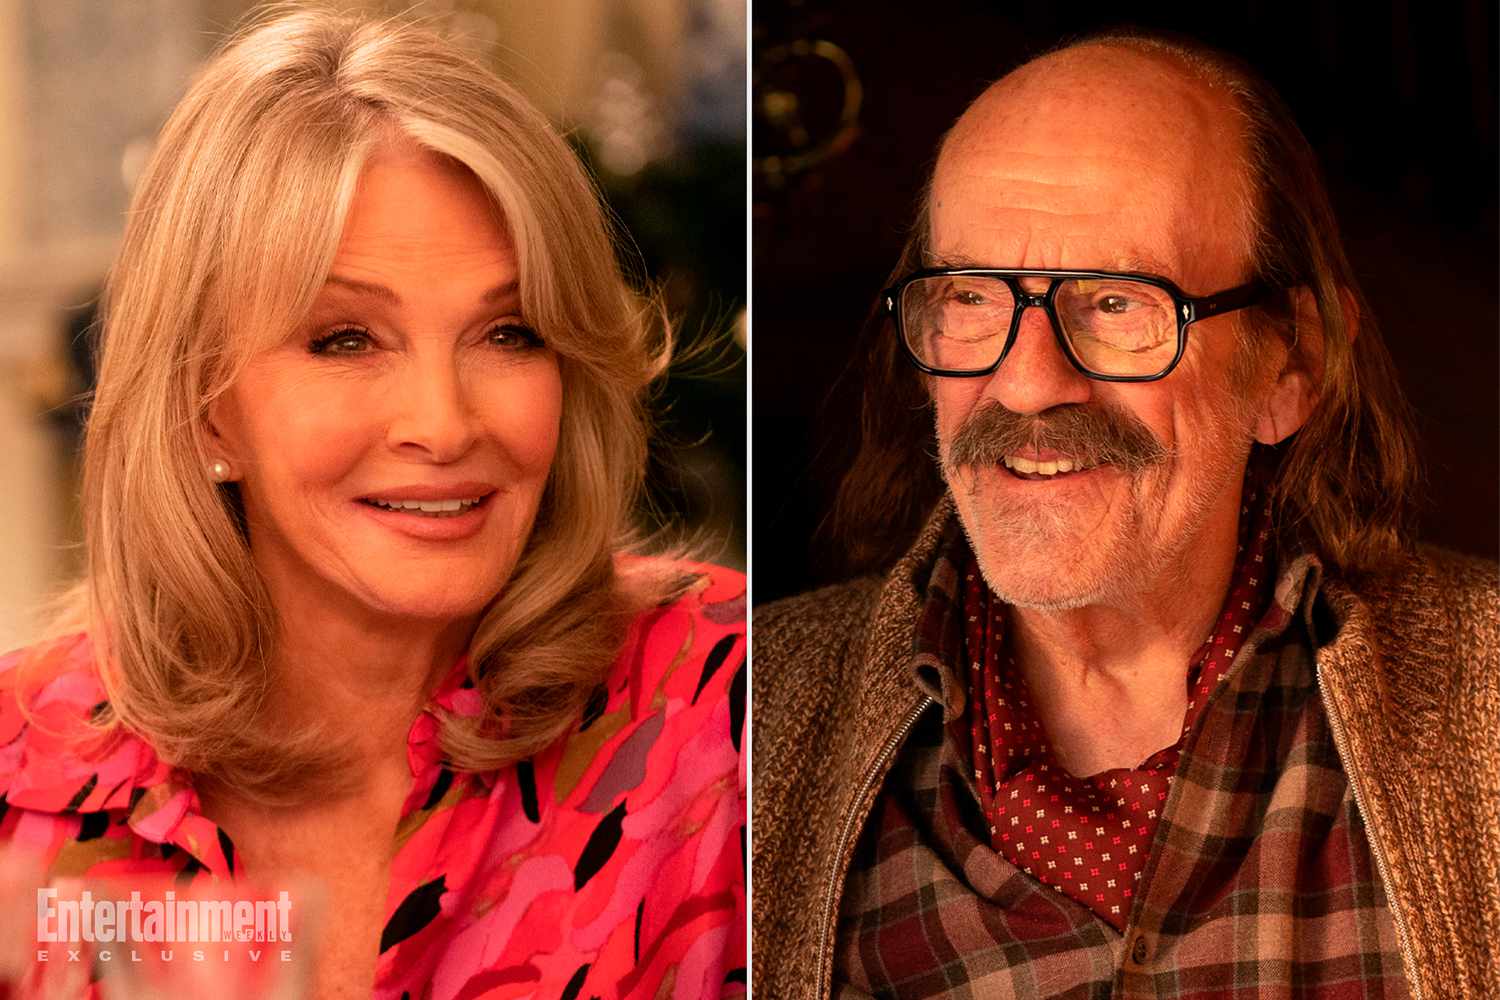 Deidre Hall to appear on 'Hacks' season 3— check out Hall and guest star Christopher Lloyd first-look photos